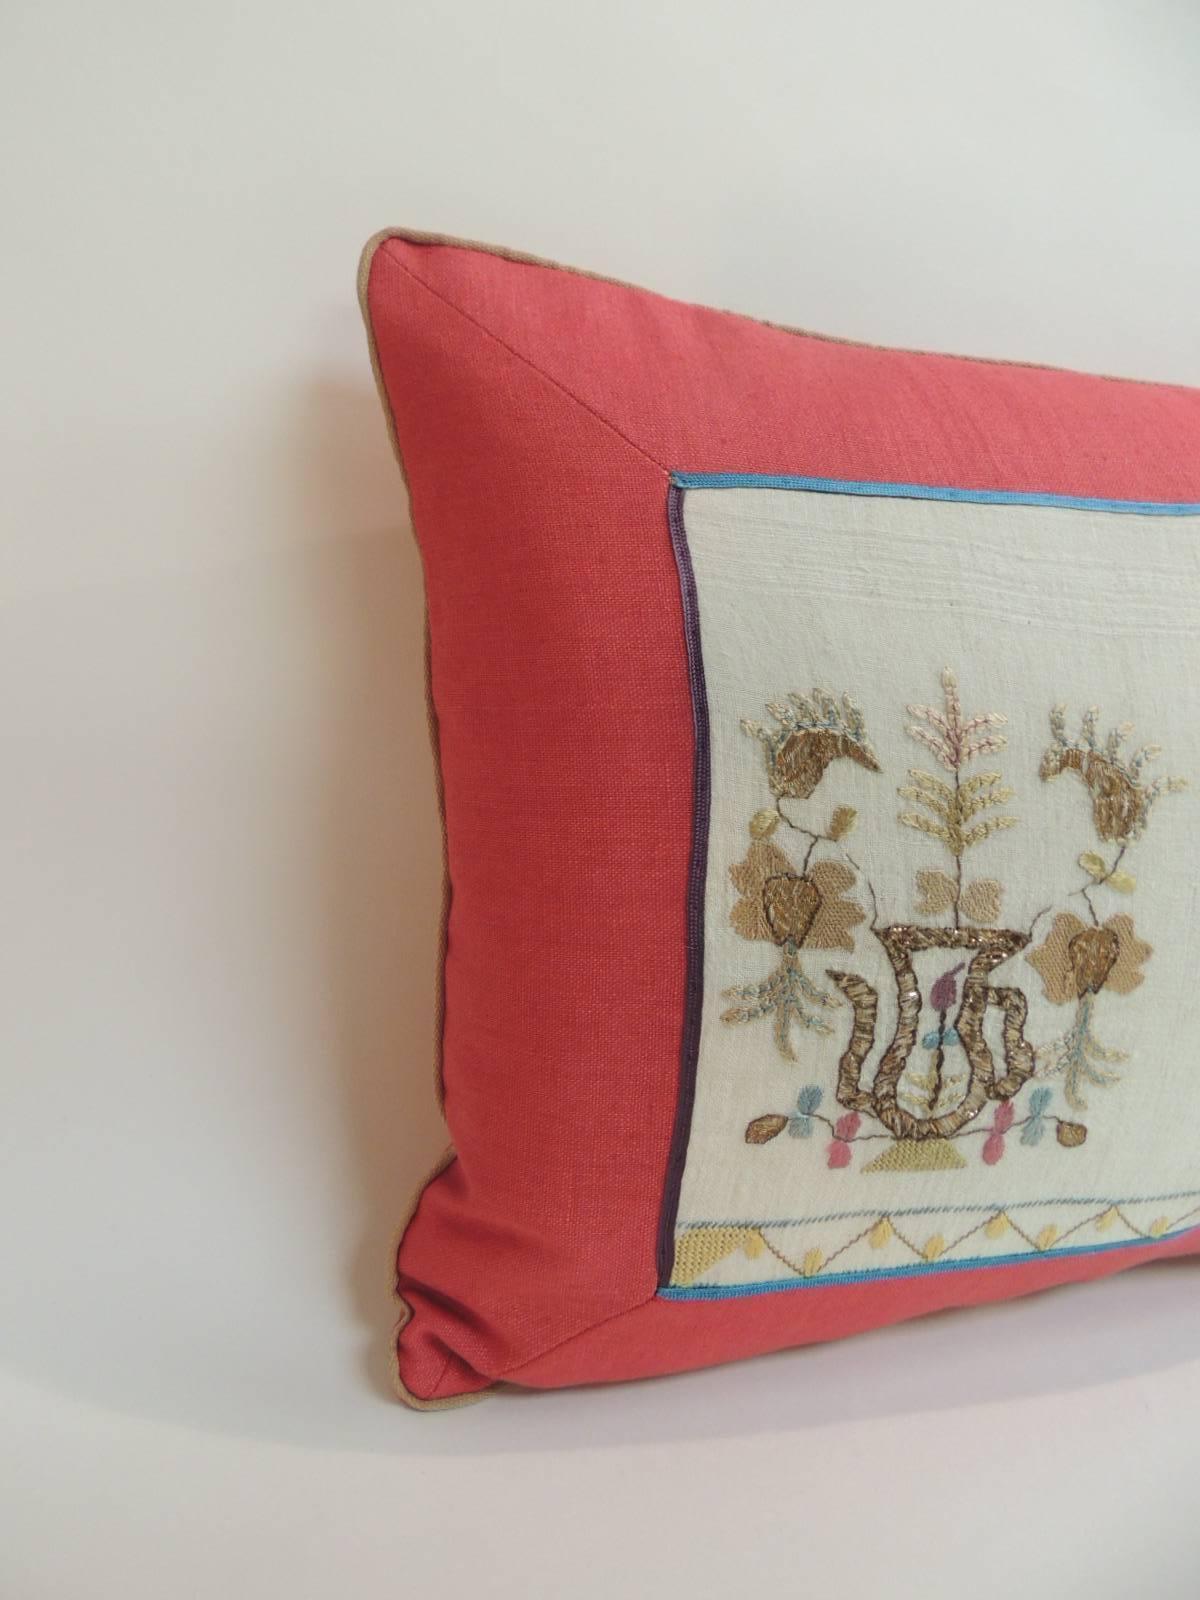 19th century Turkish embroidered linen and silk lumbar decorative pillow
Floral pattern of blooming flowers embroidered on linen with copper metallic threads. Accentuated with a flat silk trims and red linen frame and backing. In shades of blue,